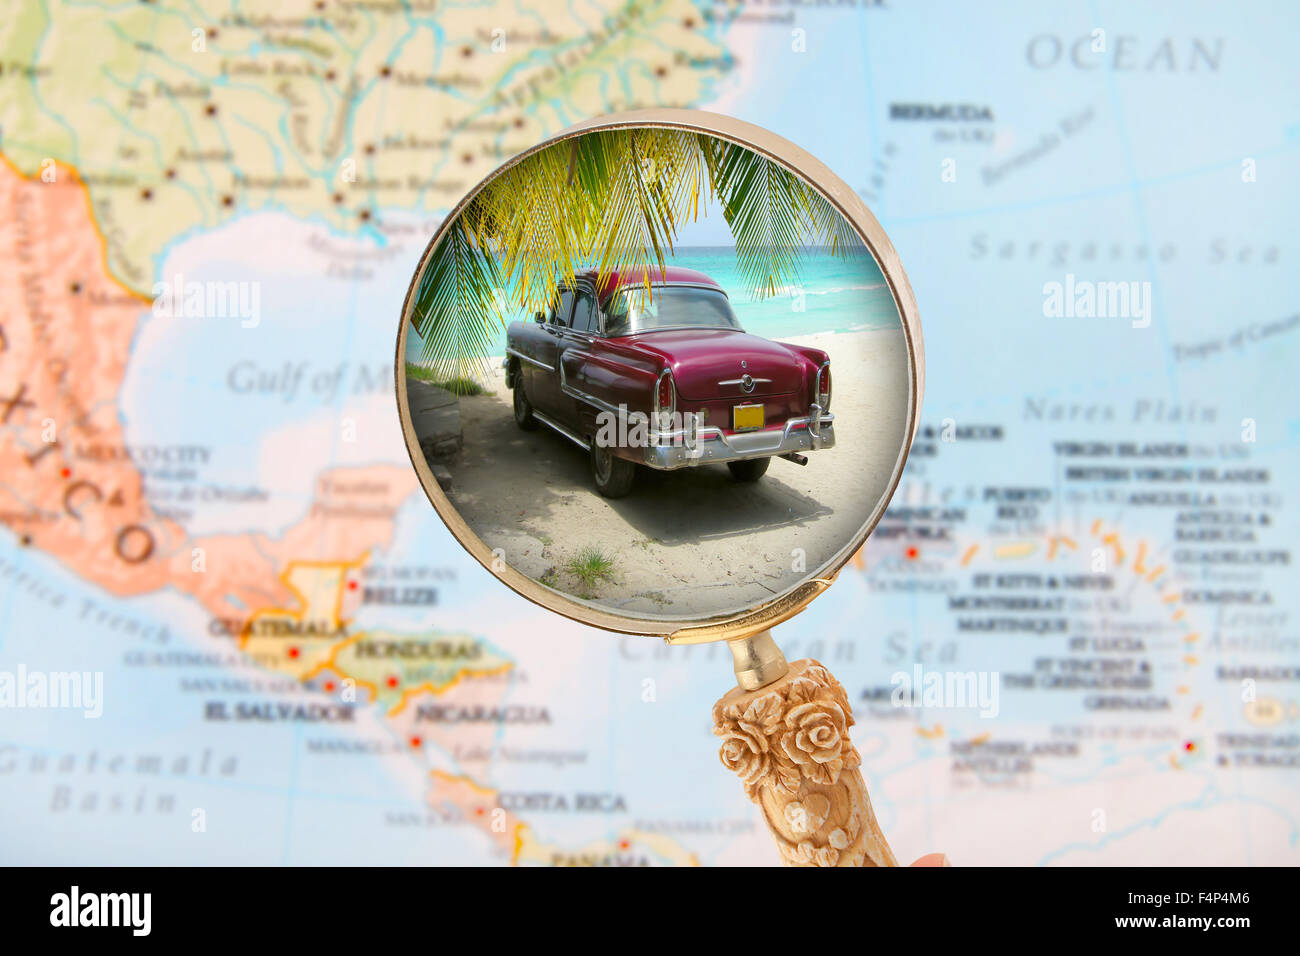 Looking in on a Cuban beach with old fashioned car with blurred Caribbean map in the background Stock Photo